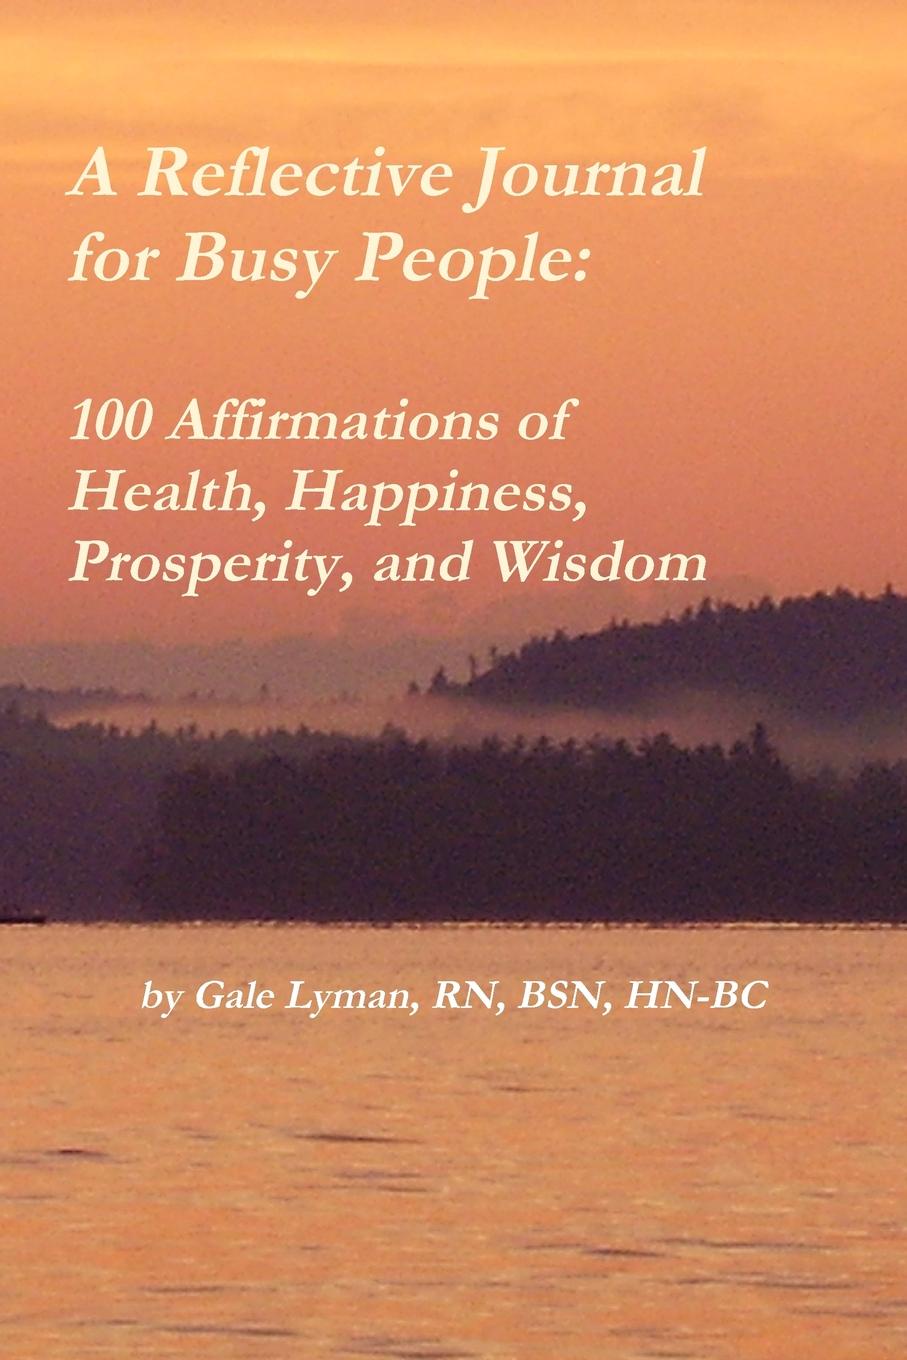 A Reflective Journal for Busy People. 100 Affirmations of Health, Happiness, Prosperity, and Wisdom